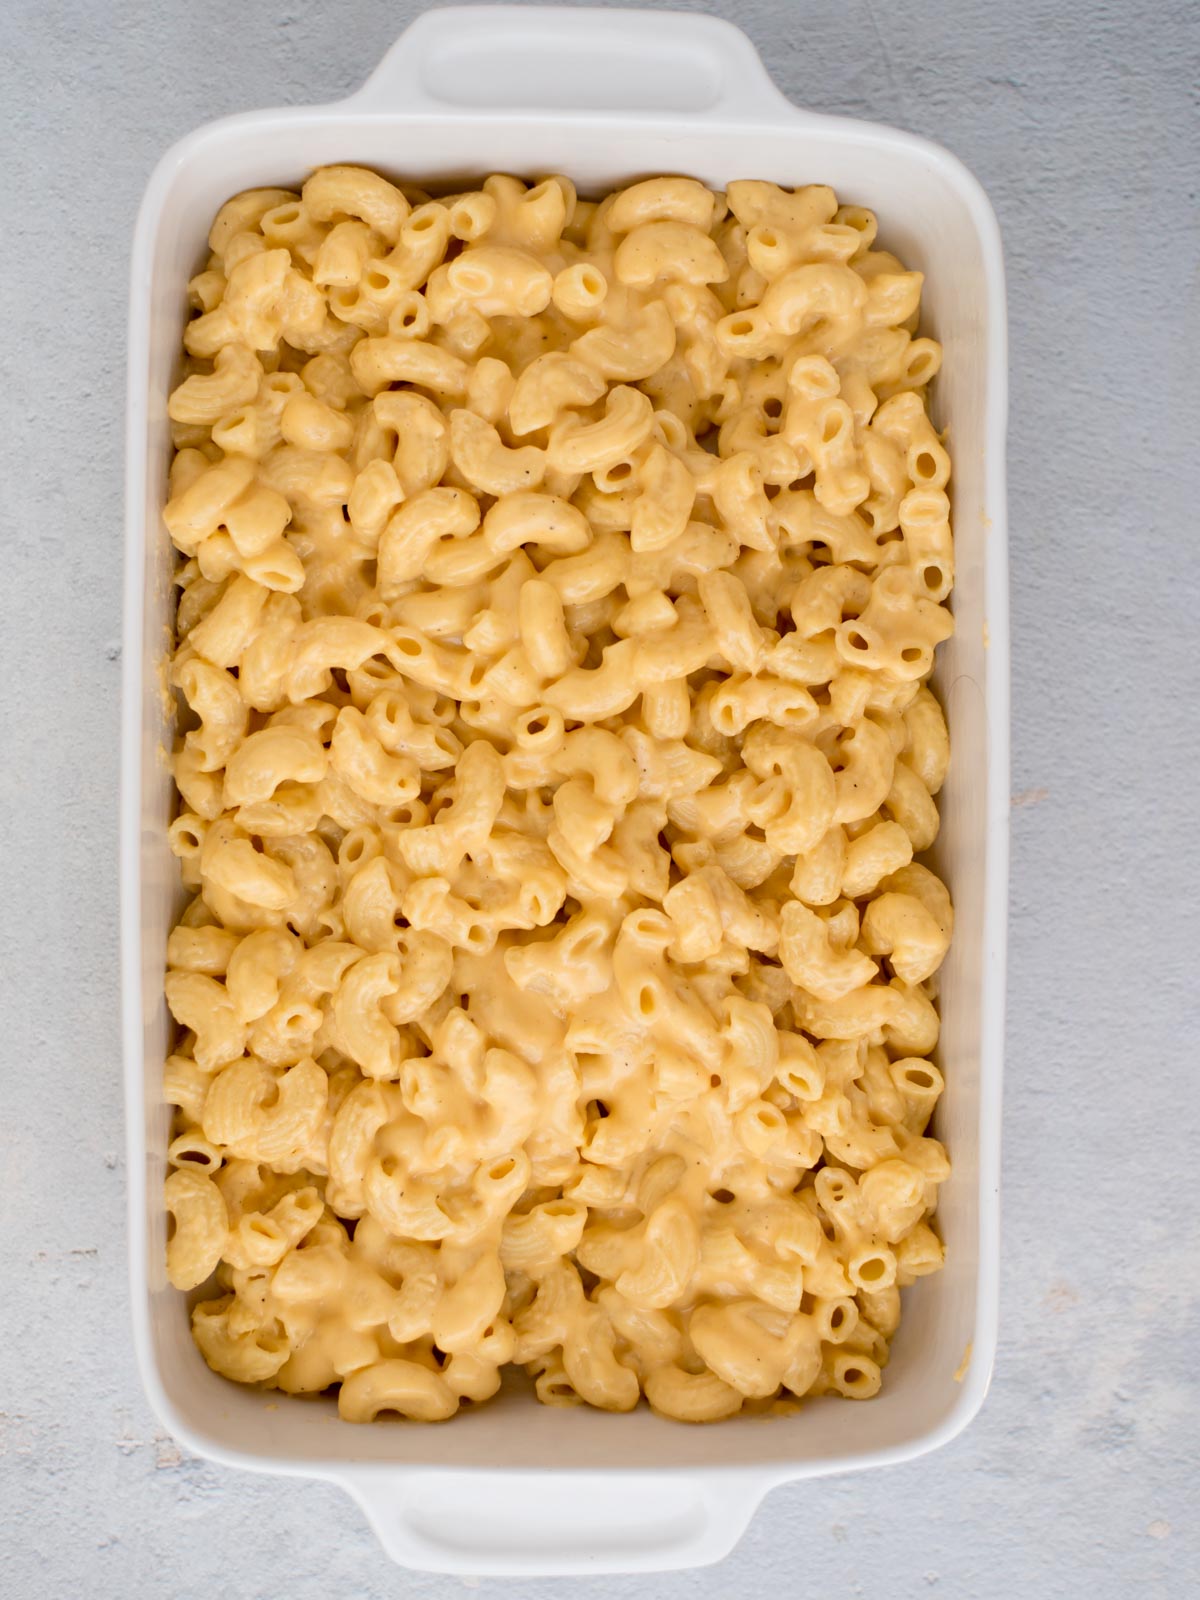 Mac and cheese placed in a baking dish.